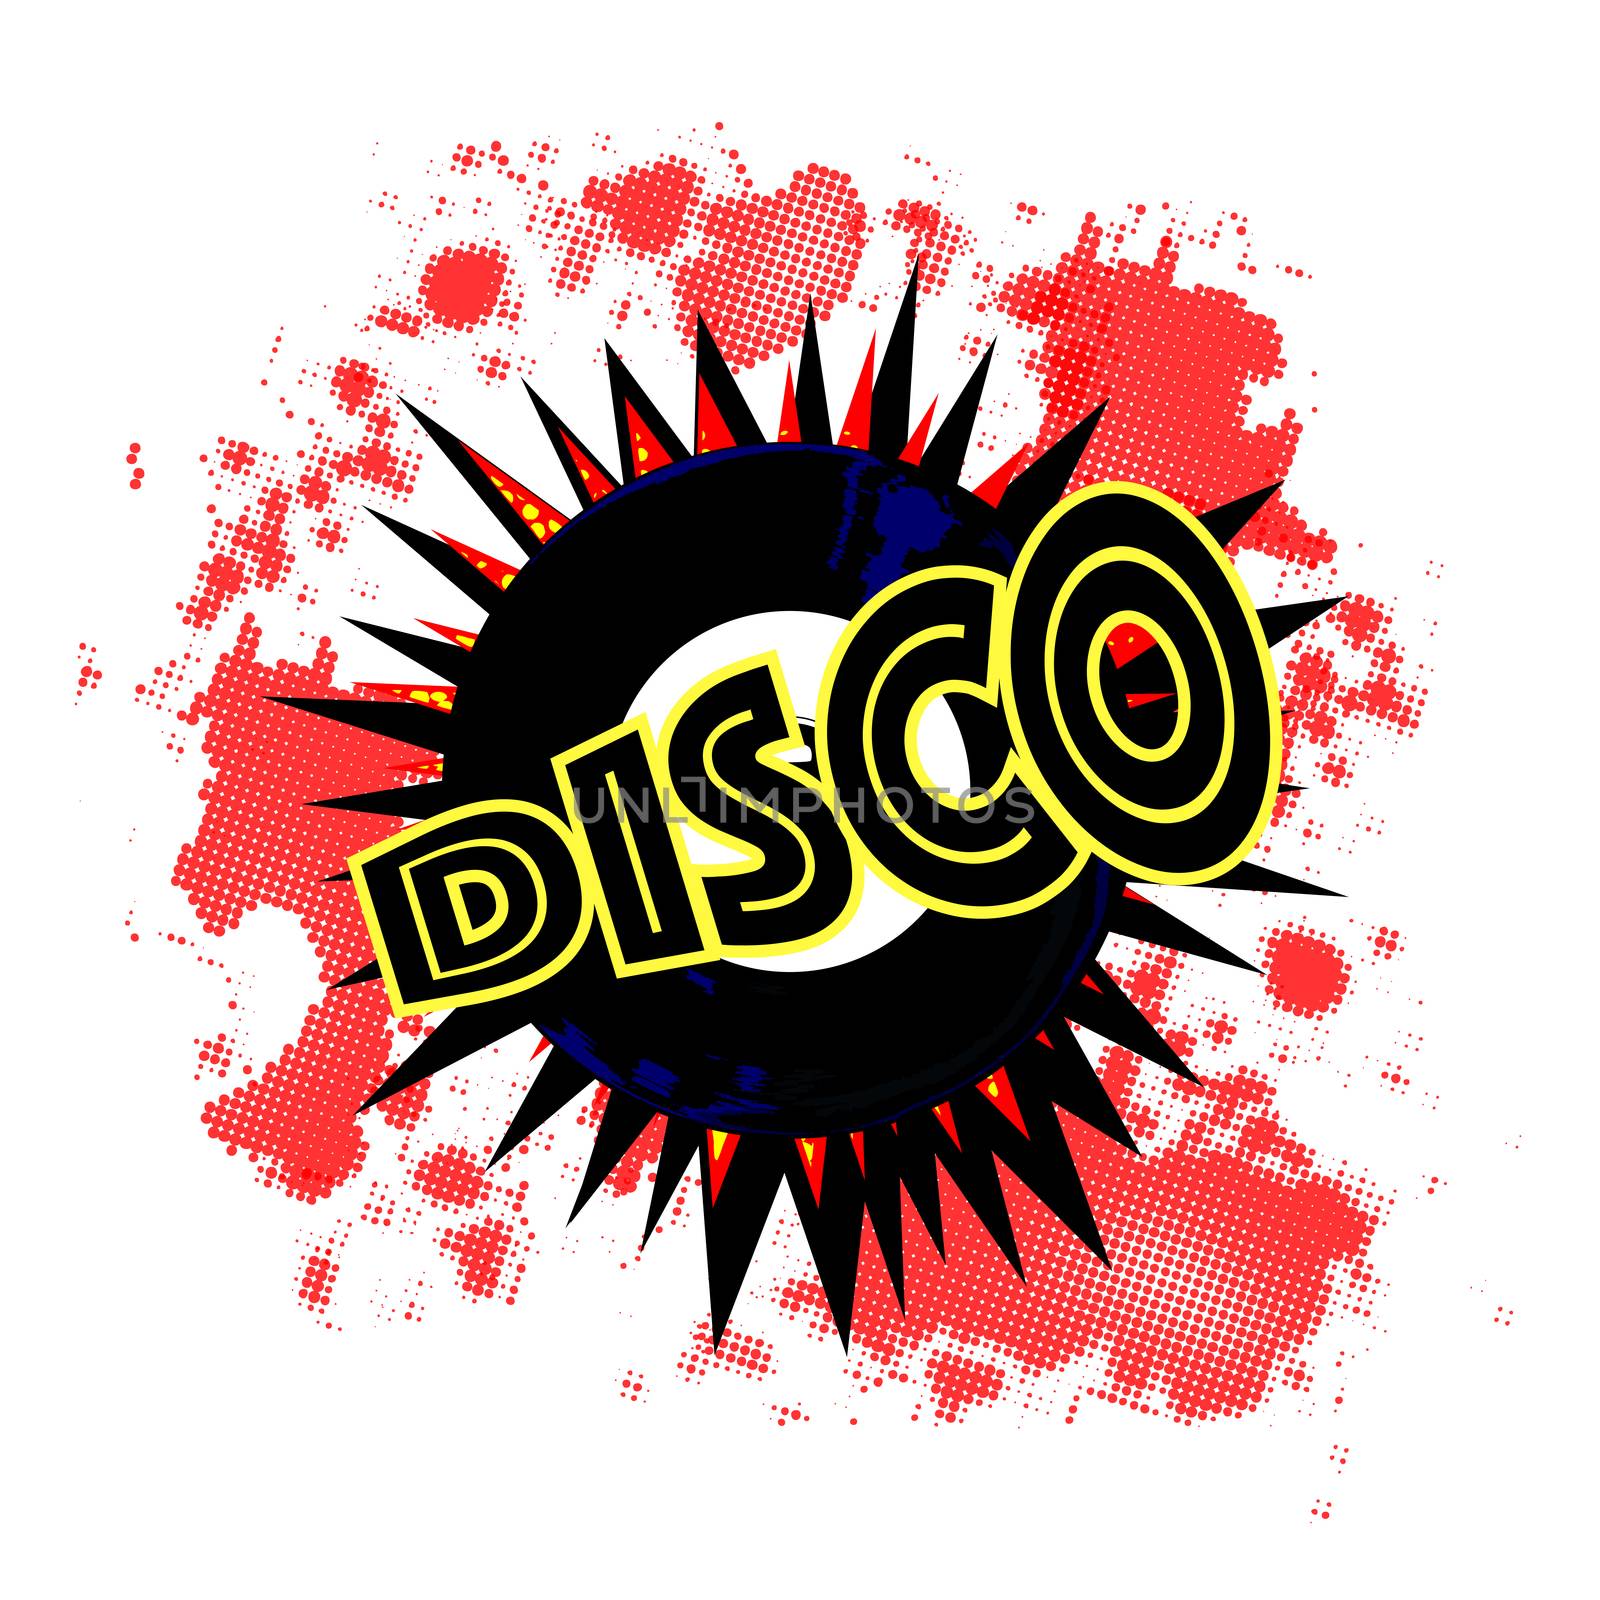 A typical 45 rpm vinyl record with a blank labell over an exploding background proclaiming disco